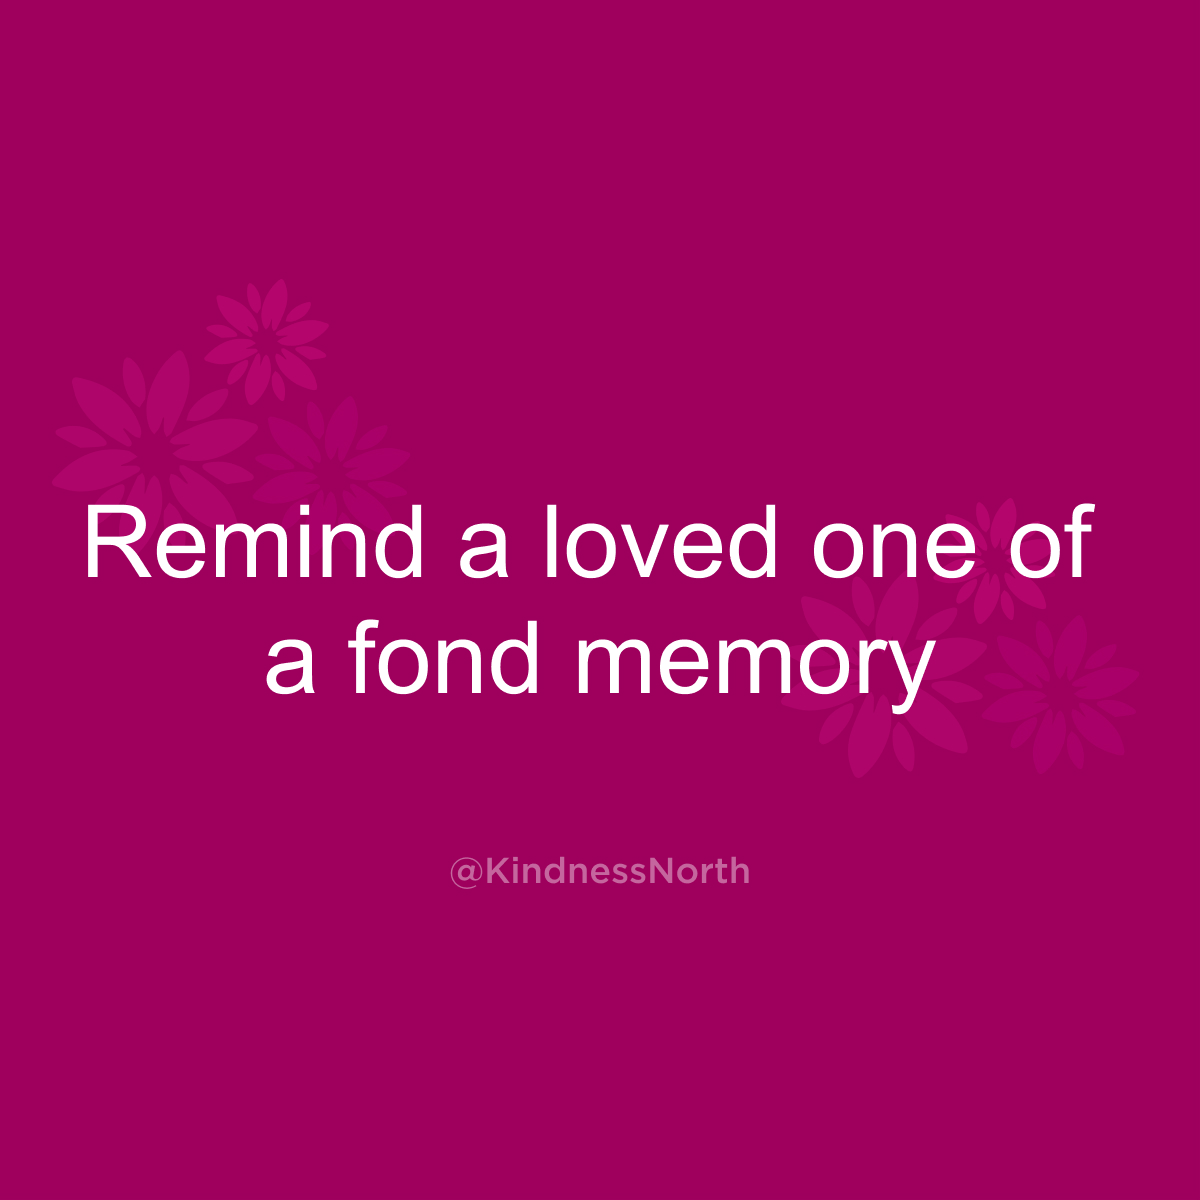 Remind a loved one of a fond memory